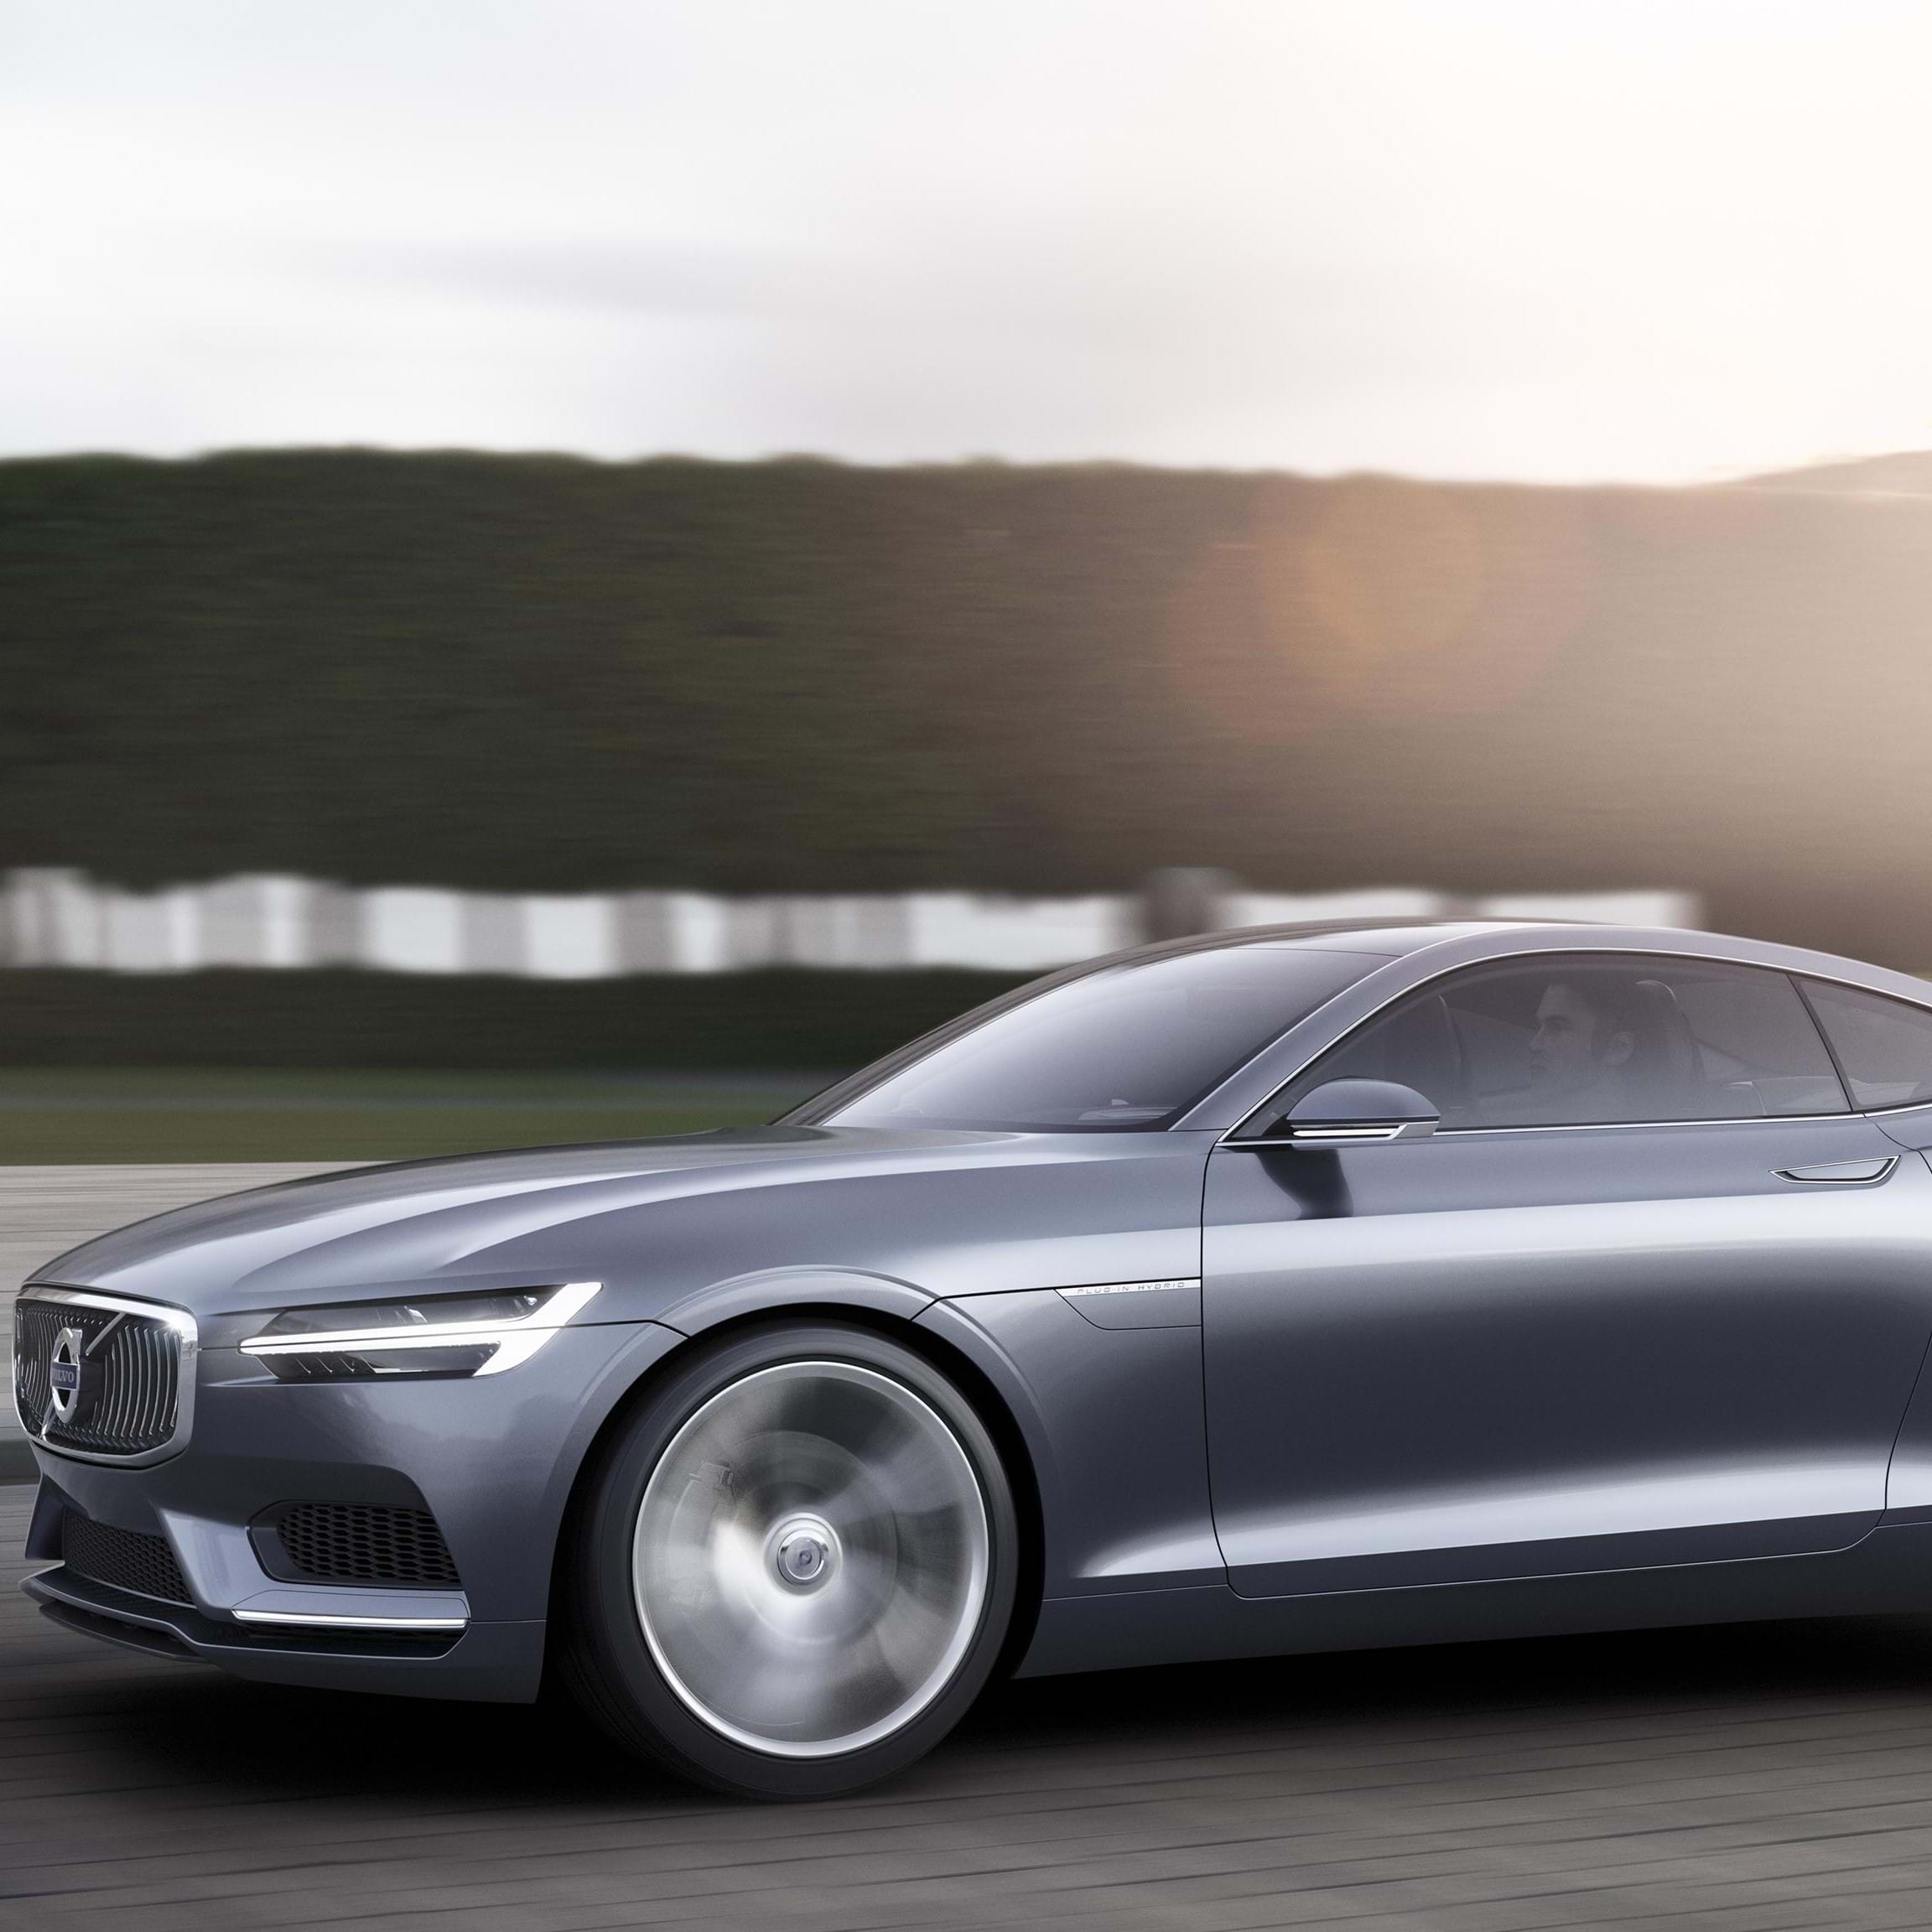 Grey Volvo Concept Coupe driving at speed